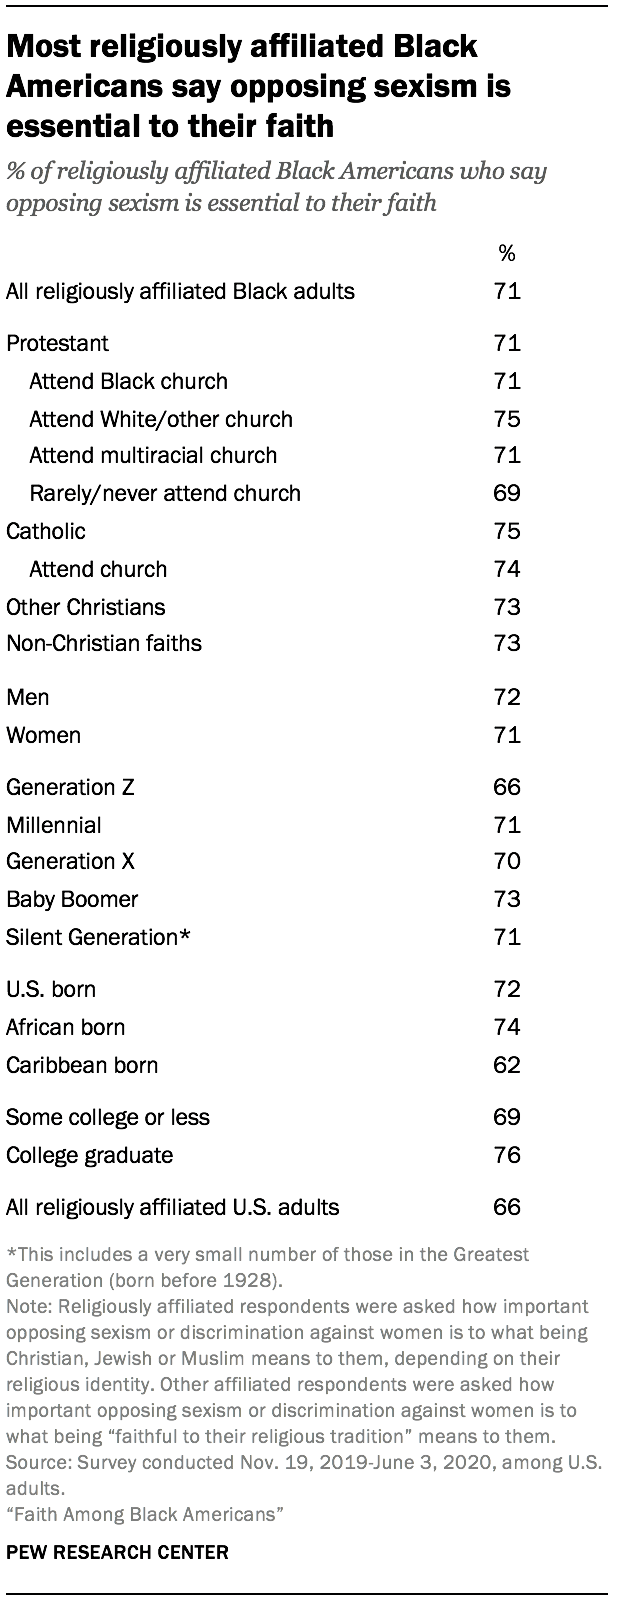 Most religiously affiliated Black Americans say opposing sexism is essential to their faith